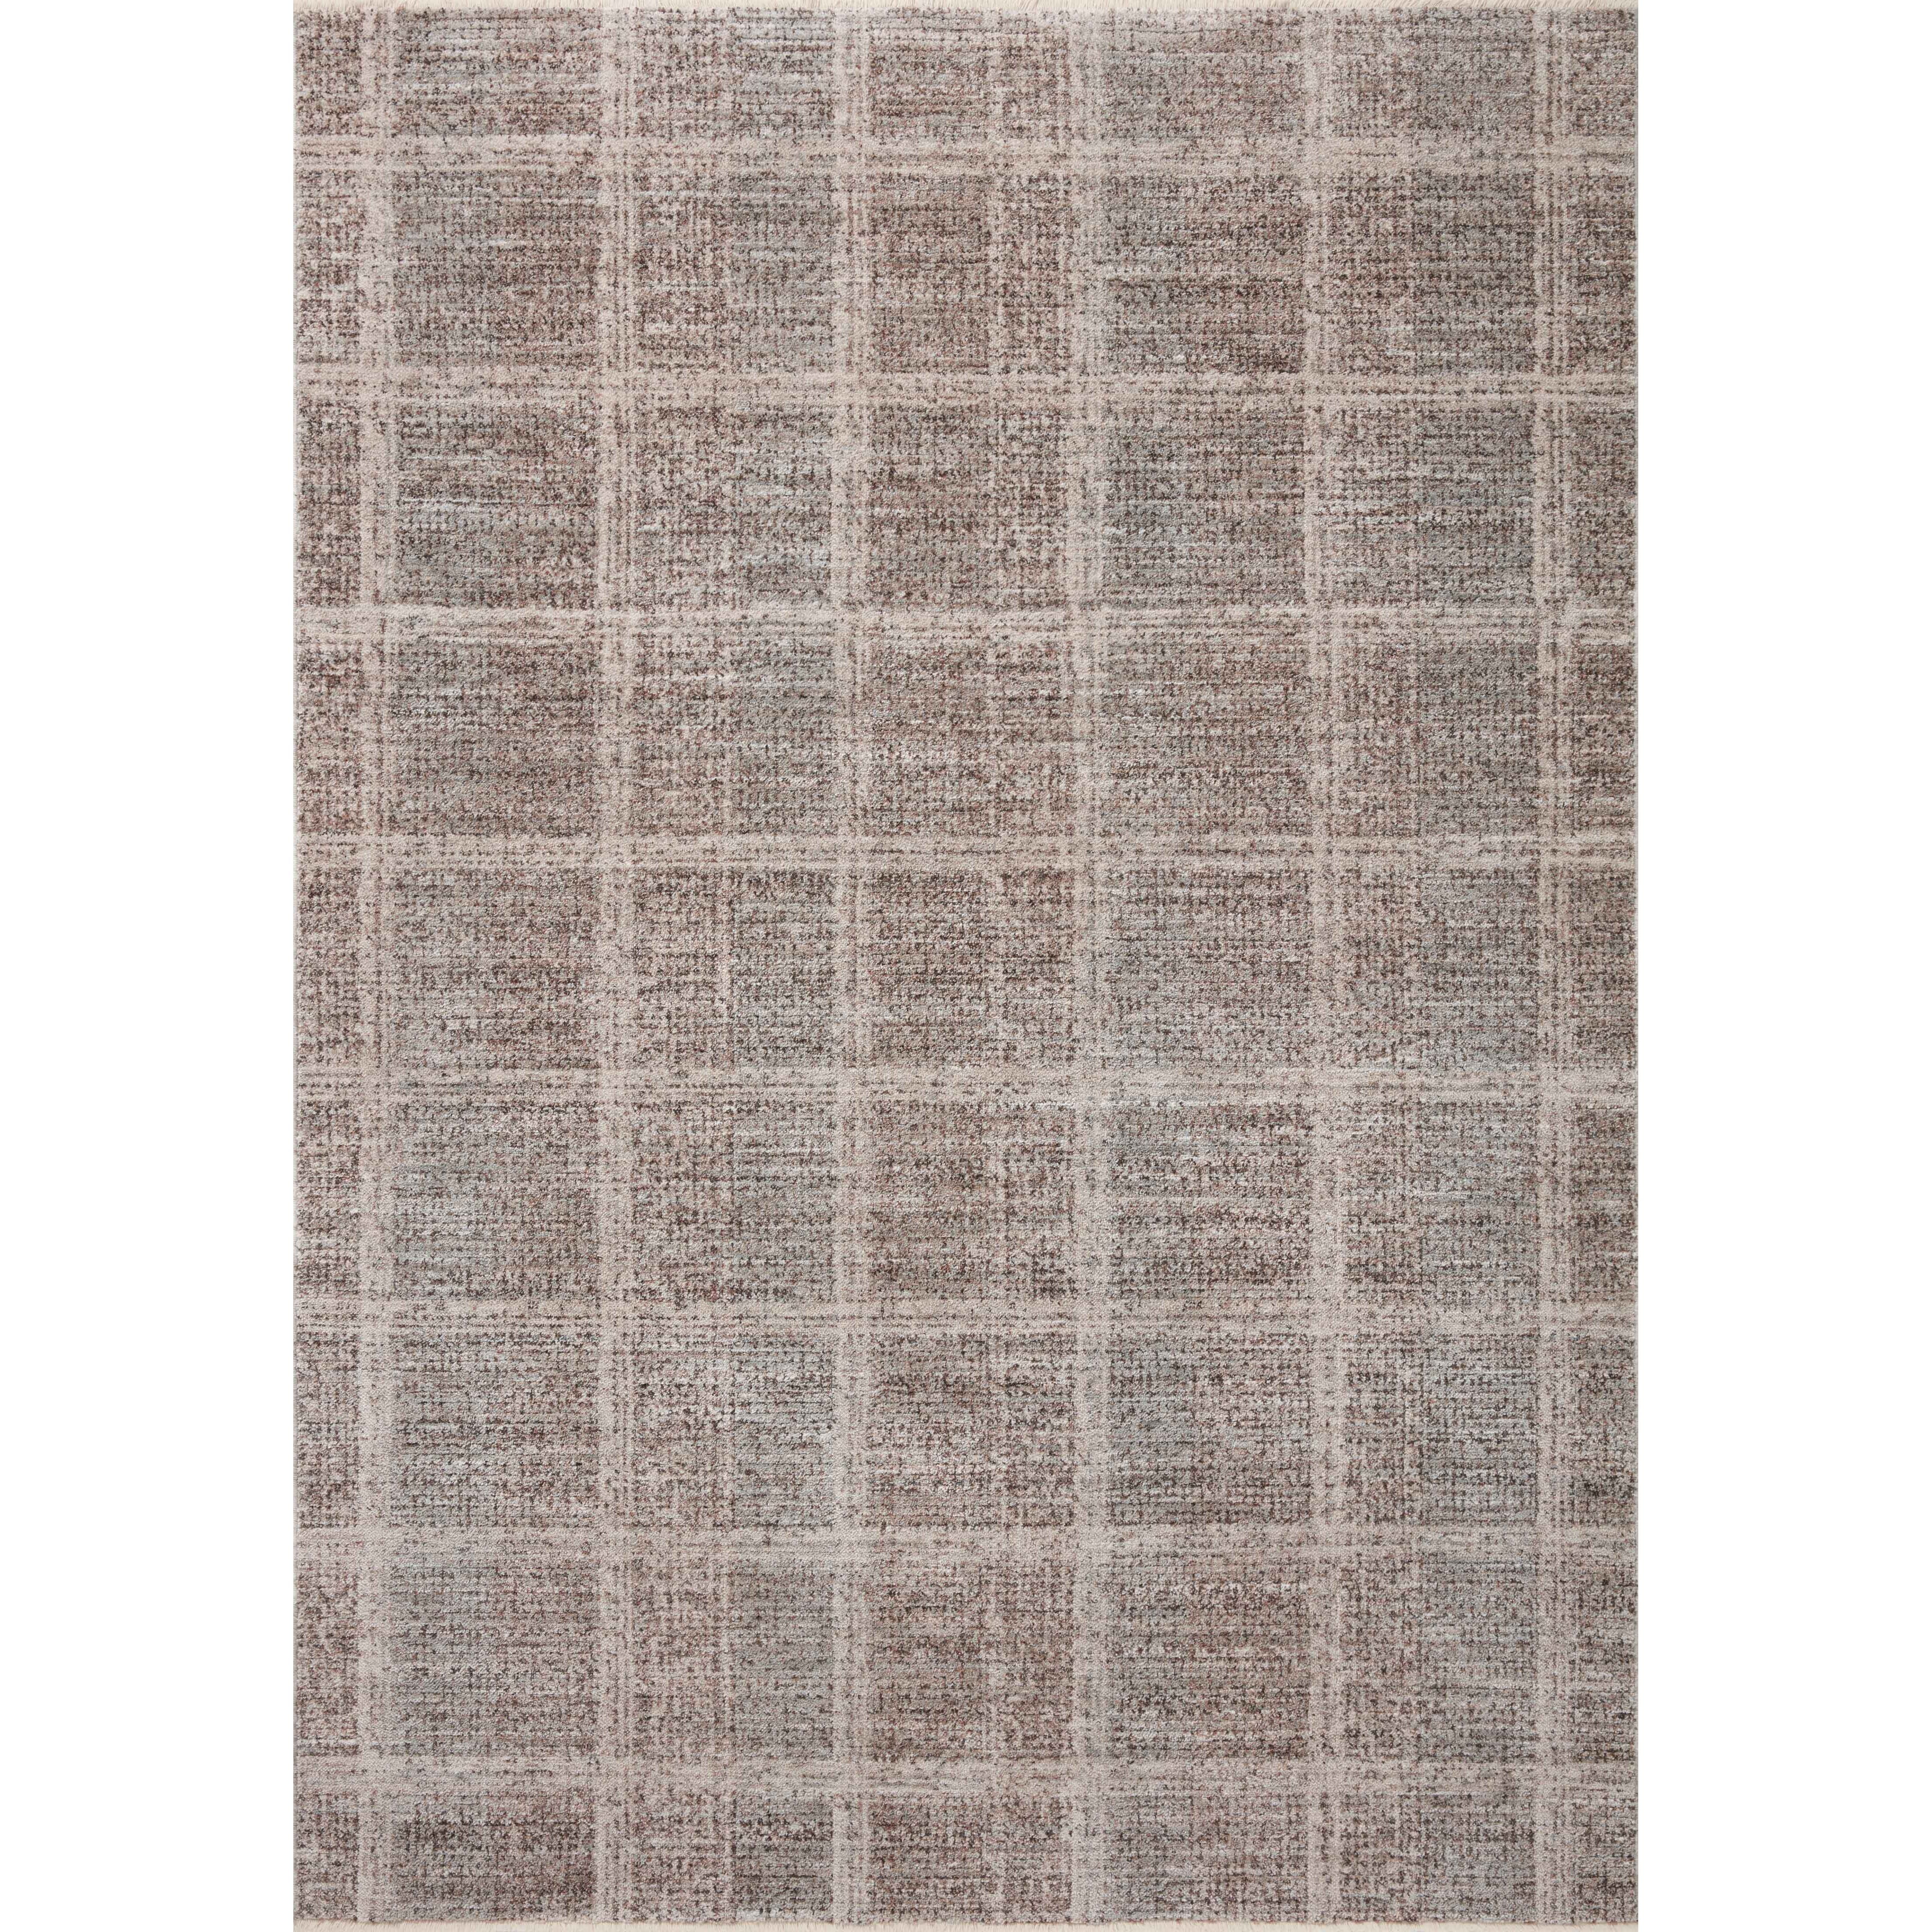 The Ember Collection by Angela Rose x Loloi is a modern flatweave area rug with a timeless plaid pattern that adds depth and coziness to any living room, bedroom, dining room, or hallway. Ember is power-loomed of 100% space-dyed polyester, a durable construction that creates a nuanced depth of color, available in a range of neutral palettes. Amethyst Home provides interior design, new home construction design consulting, vintage area rugs, and lighting in the Austin metro area.